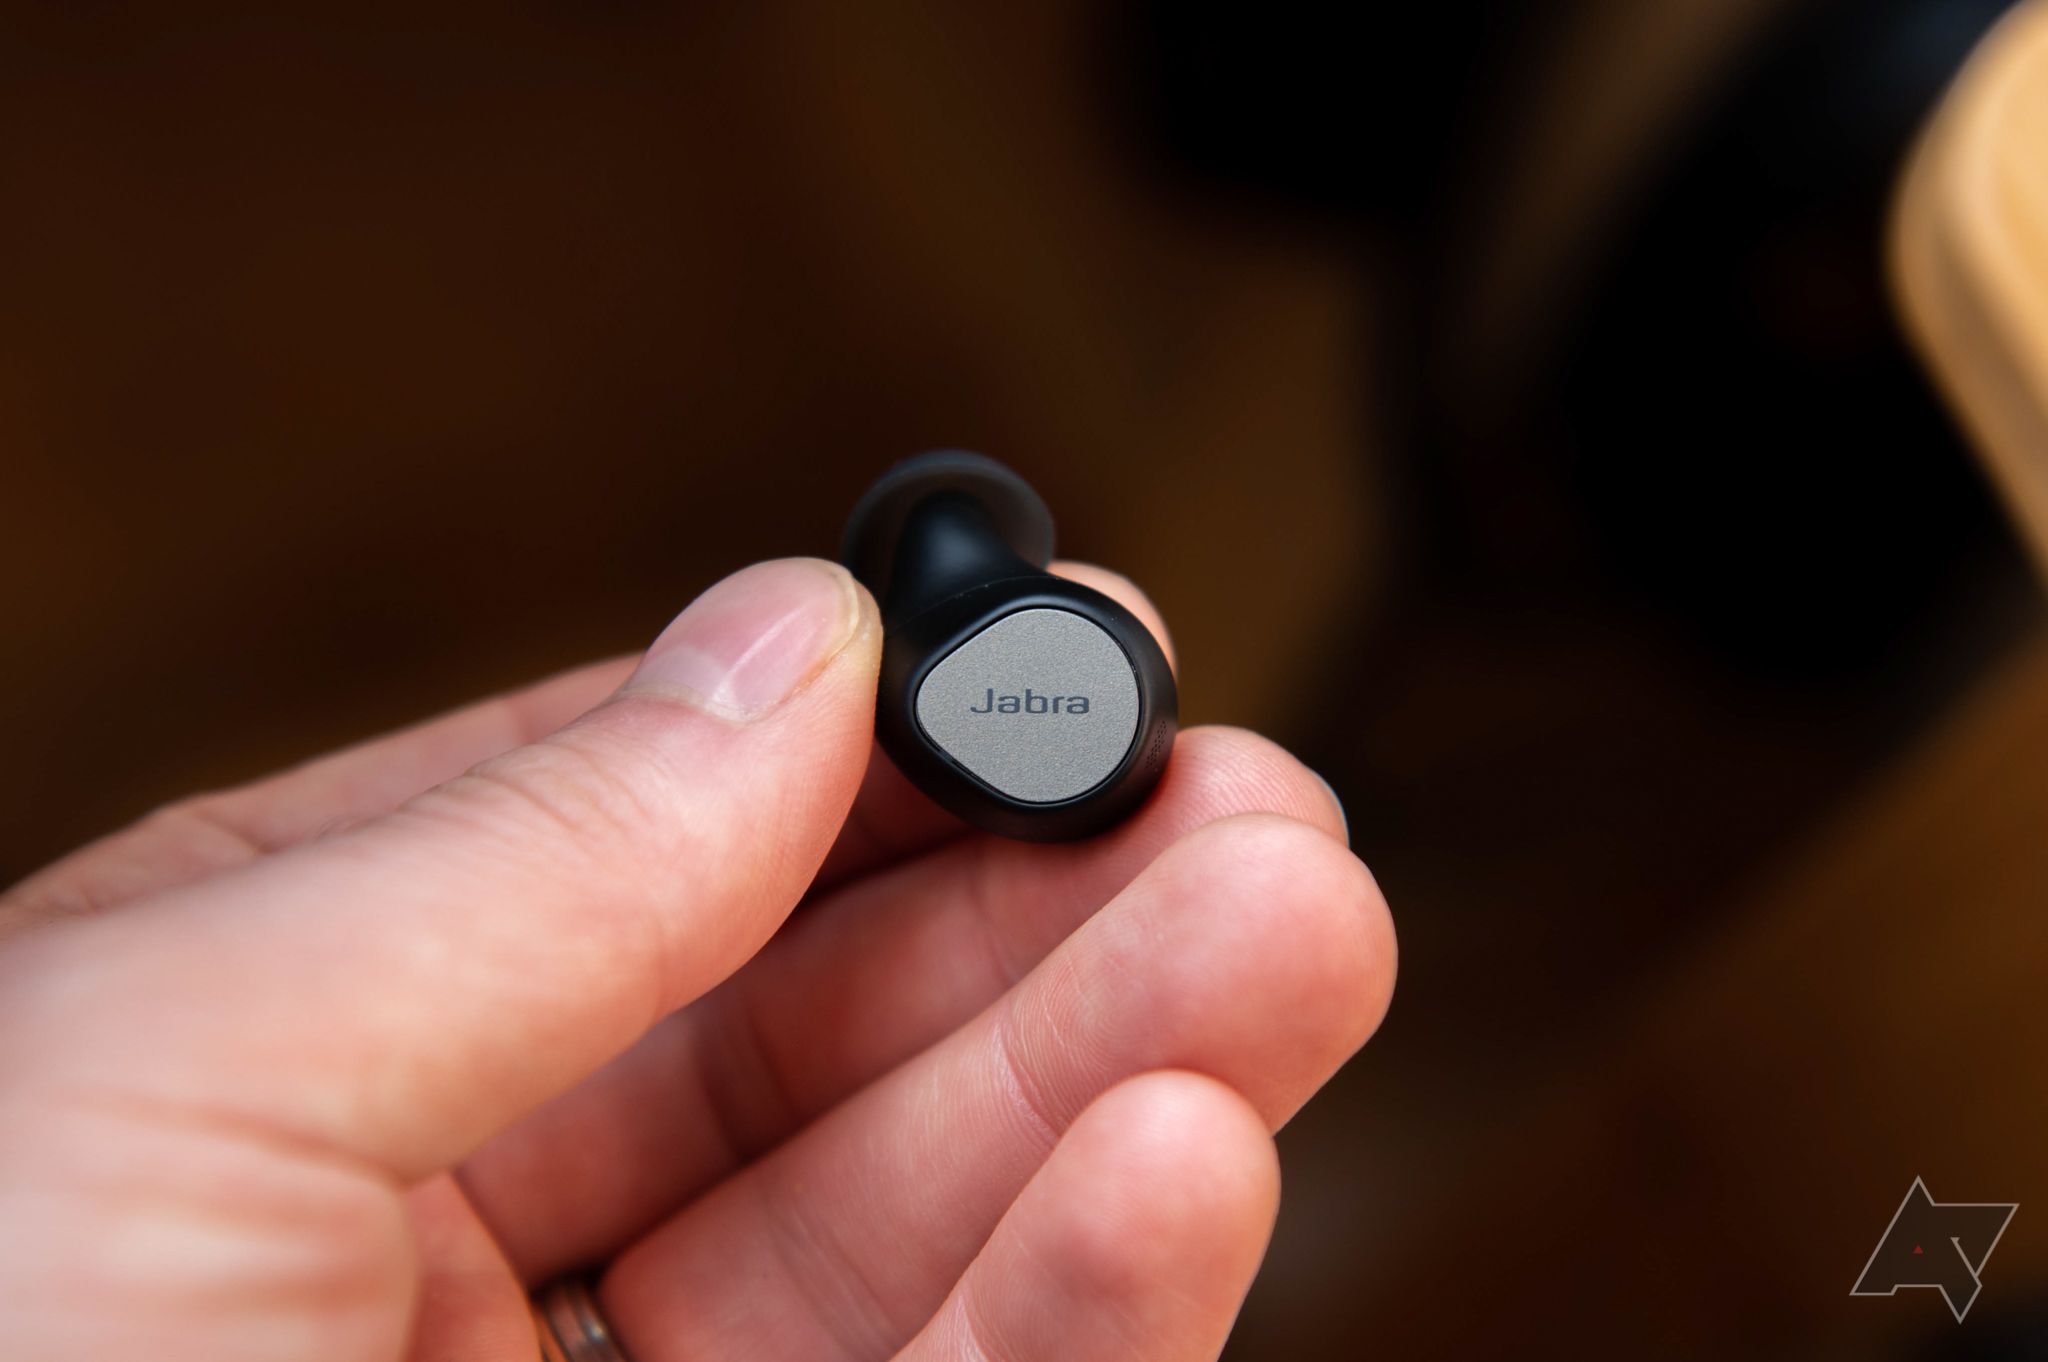 Jabra's best earbuds are great but usually overpriced, but right now they're just great